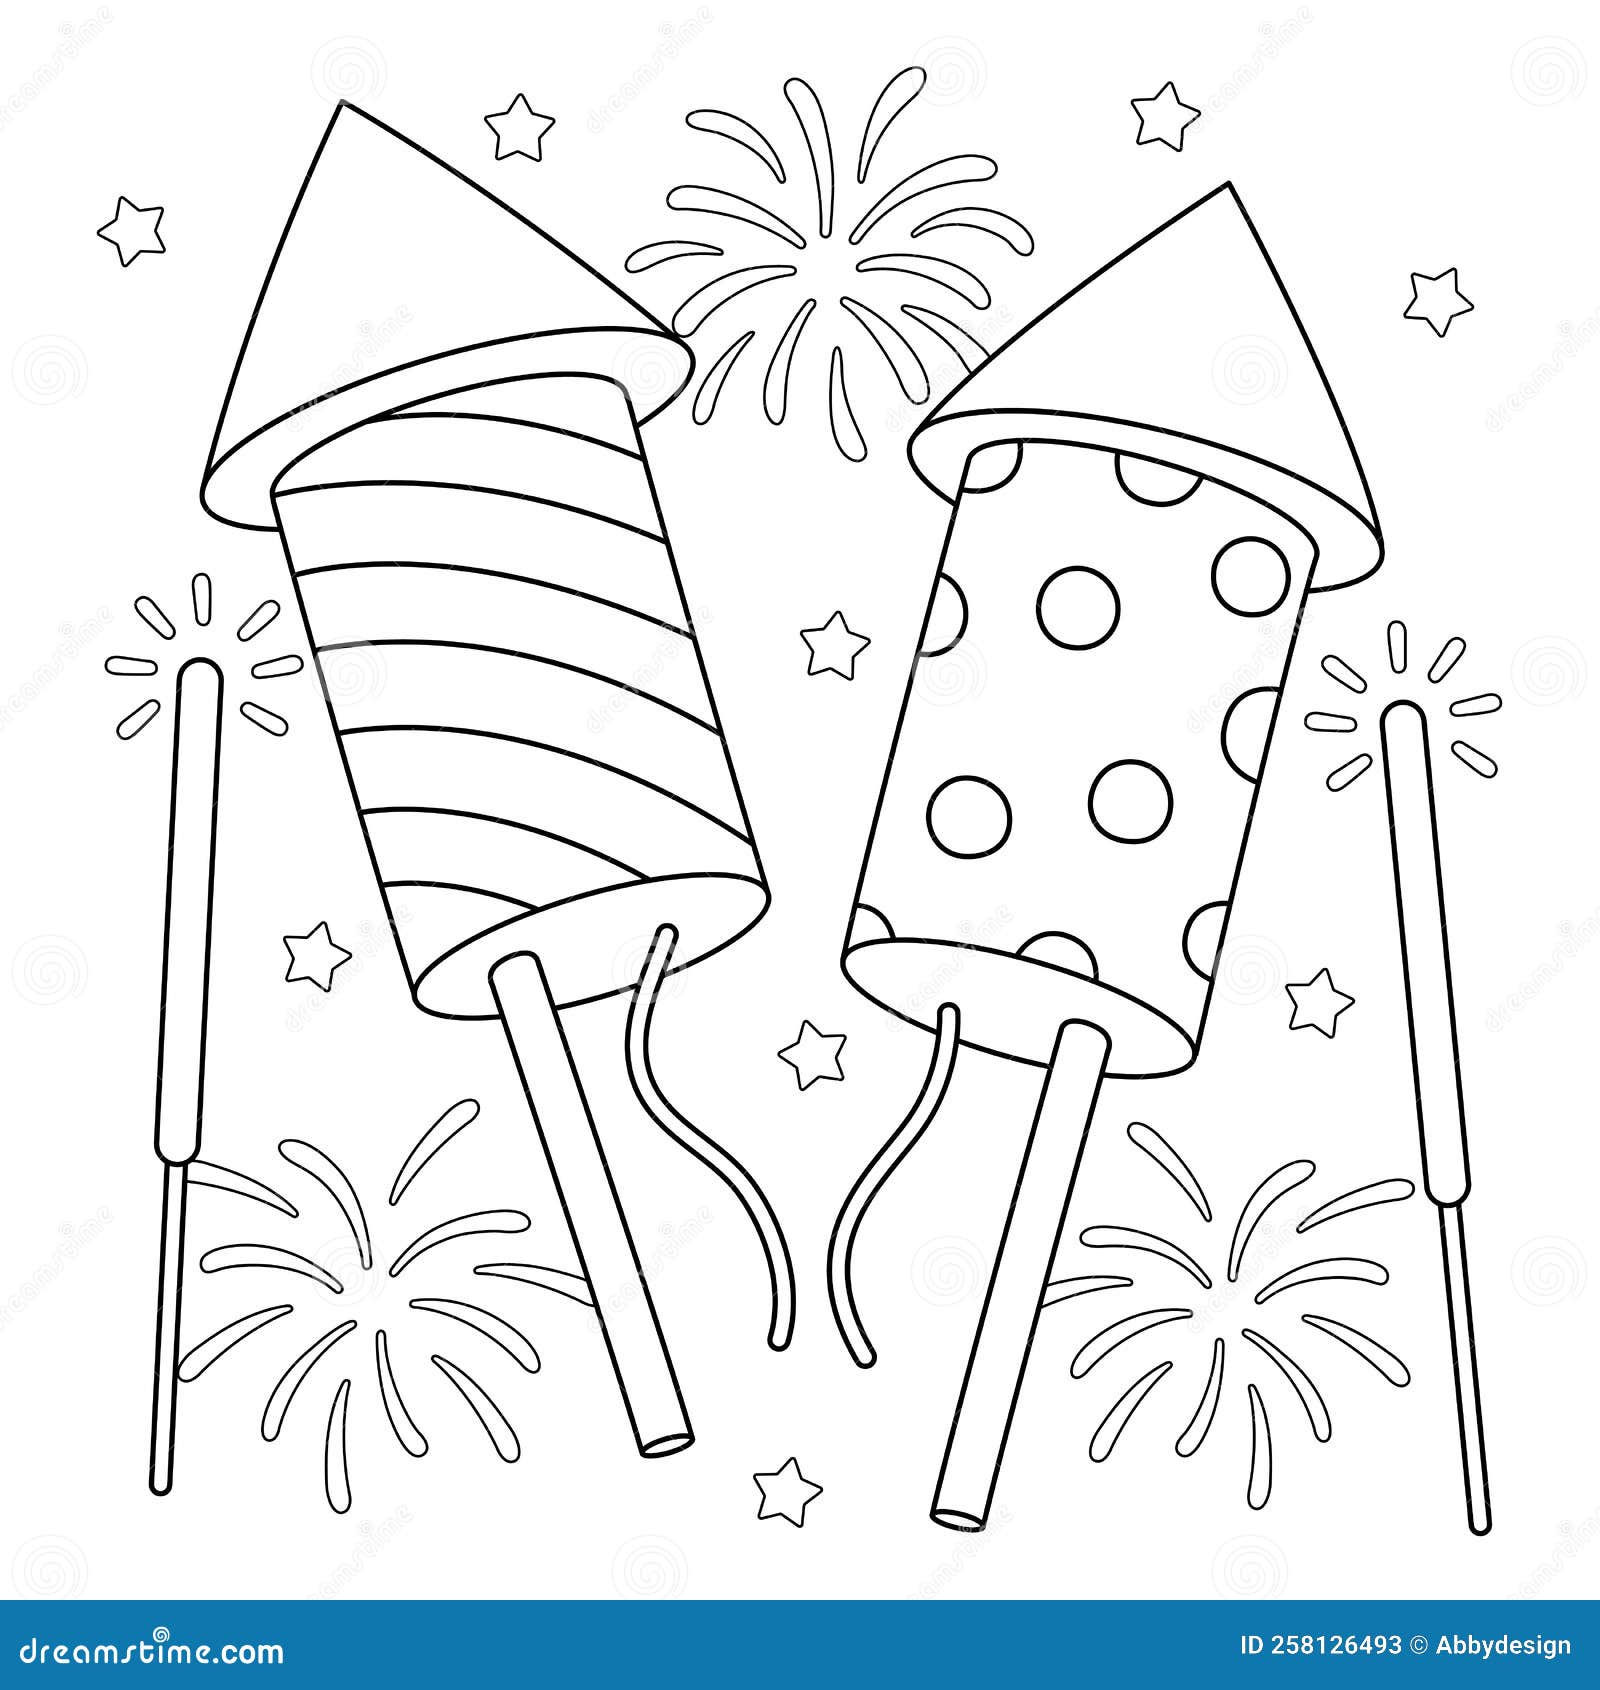 Fireworks coloring page stock illustrations â fireworks coloring page stock illustrations vectors clipart